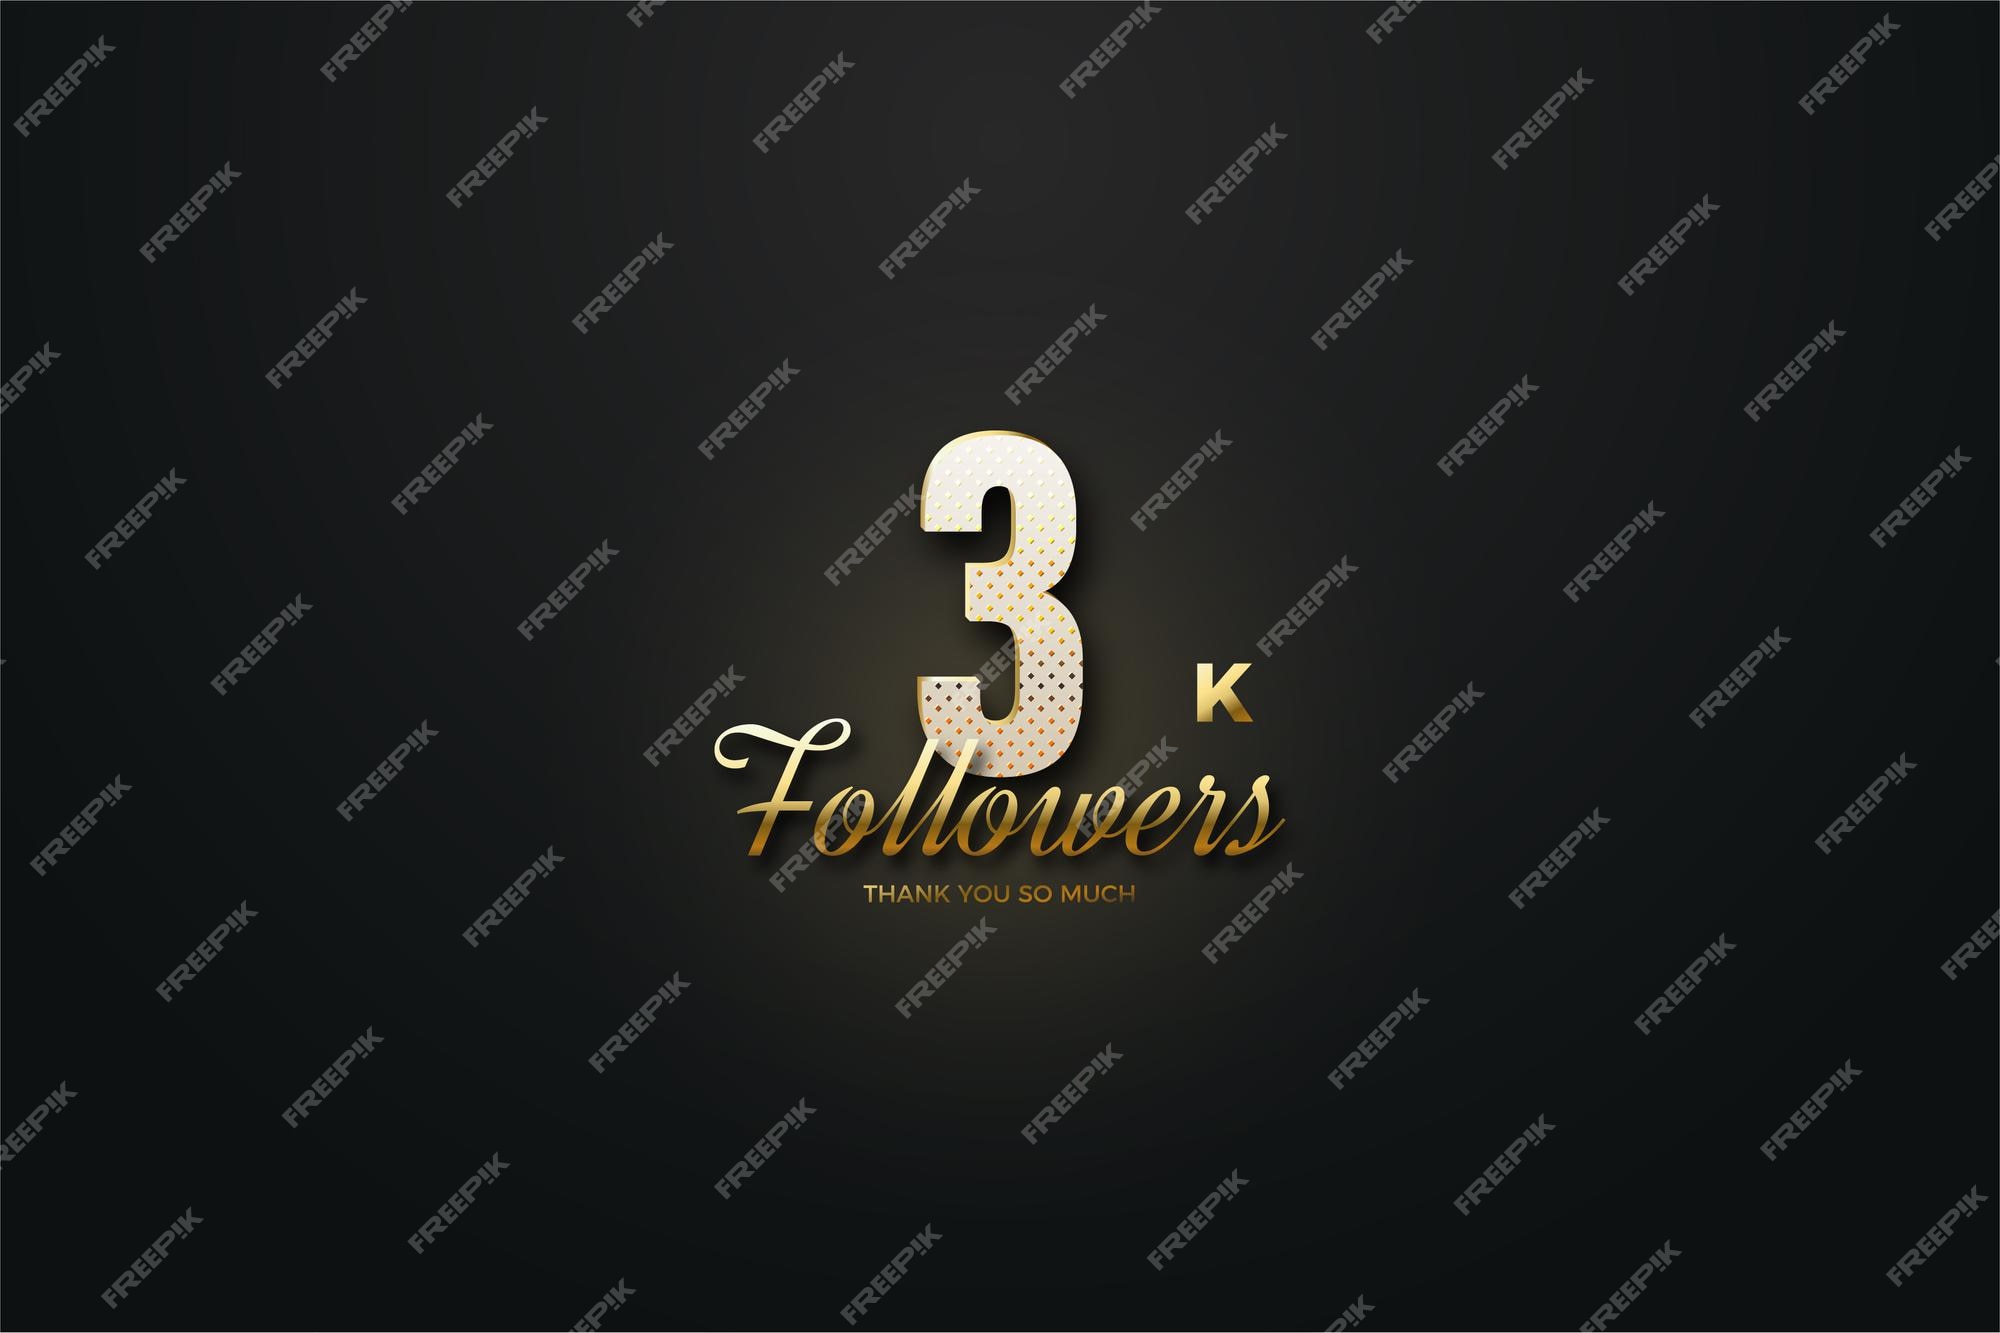 Premium Vector | 3k followers background with shining figure